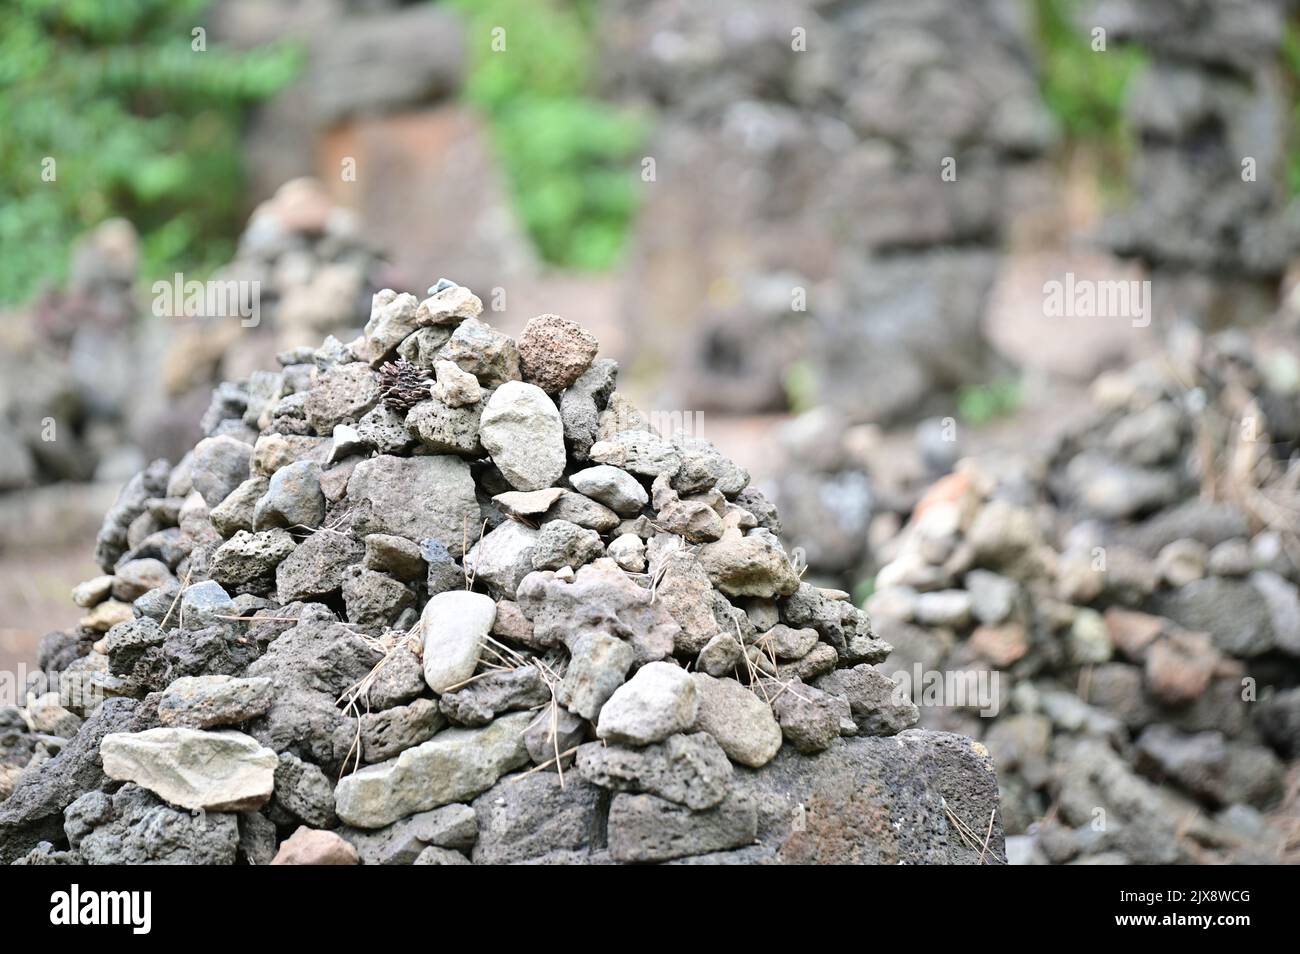 The stones piled up to form a tomb Stock Photo